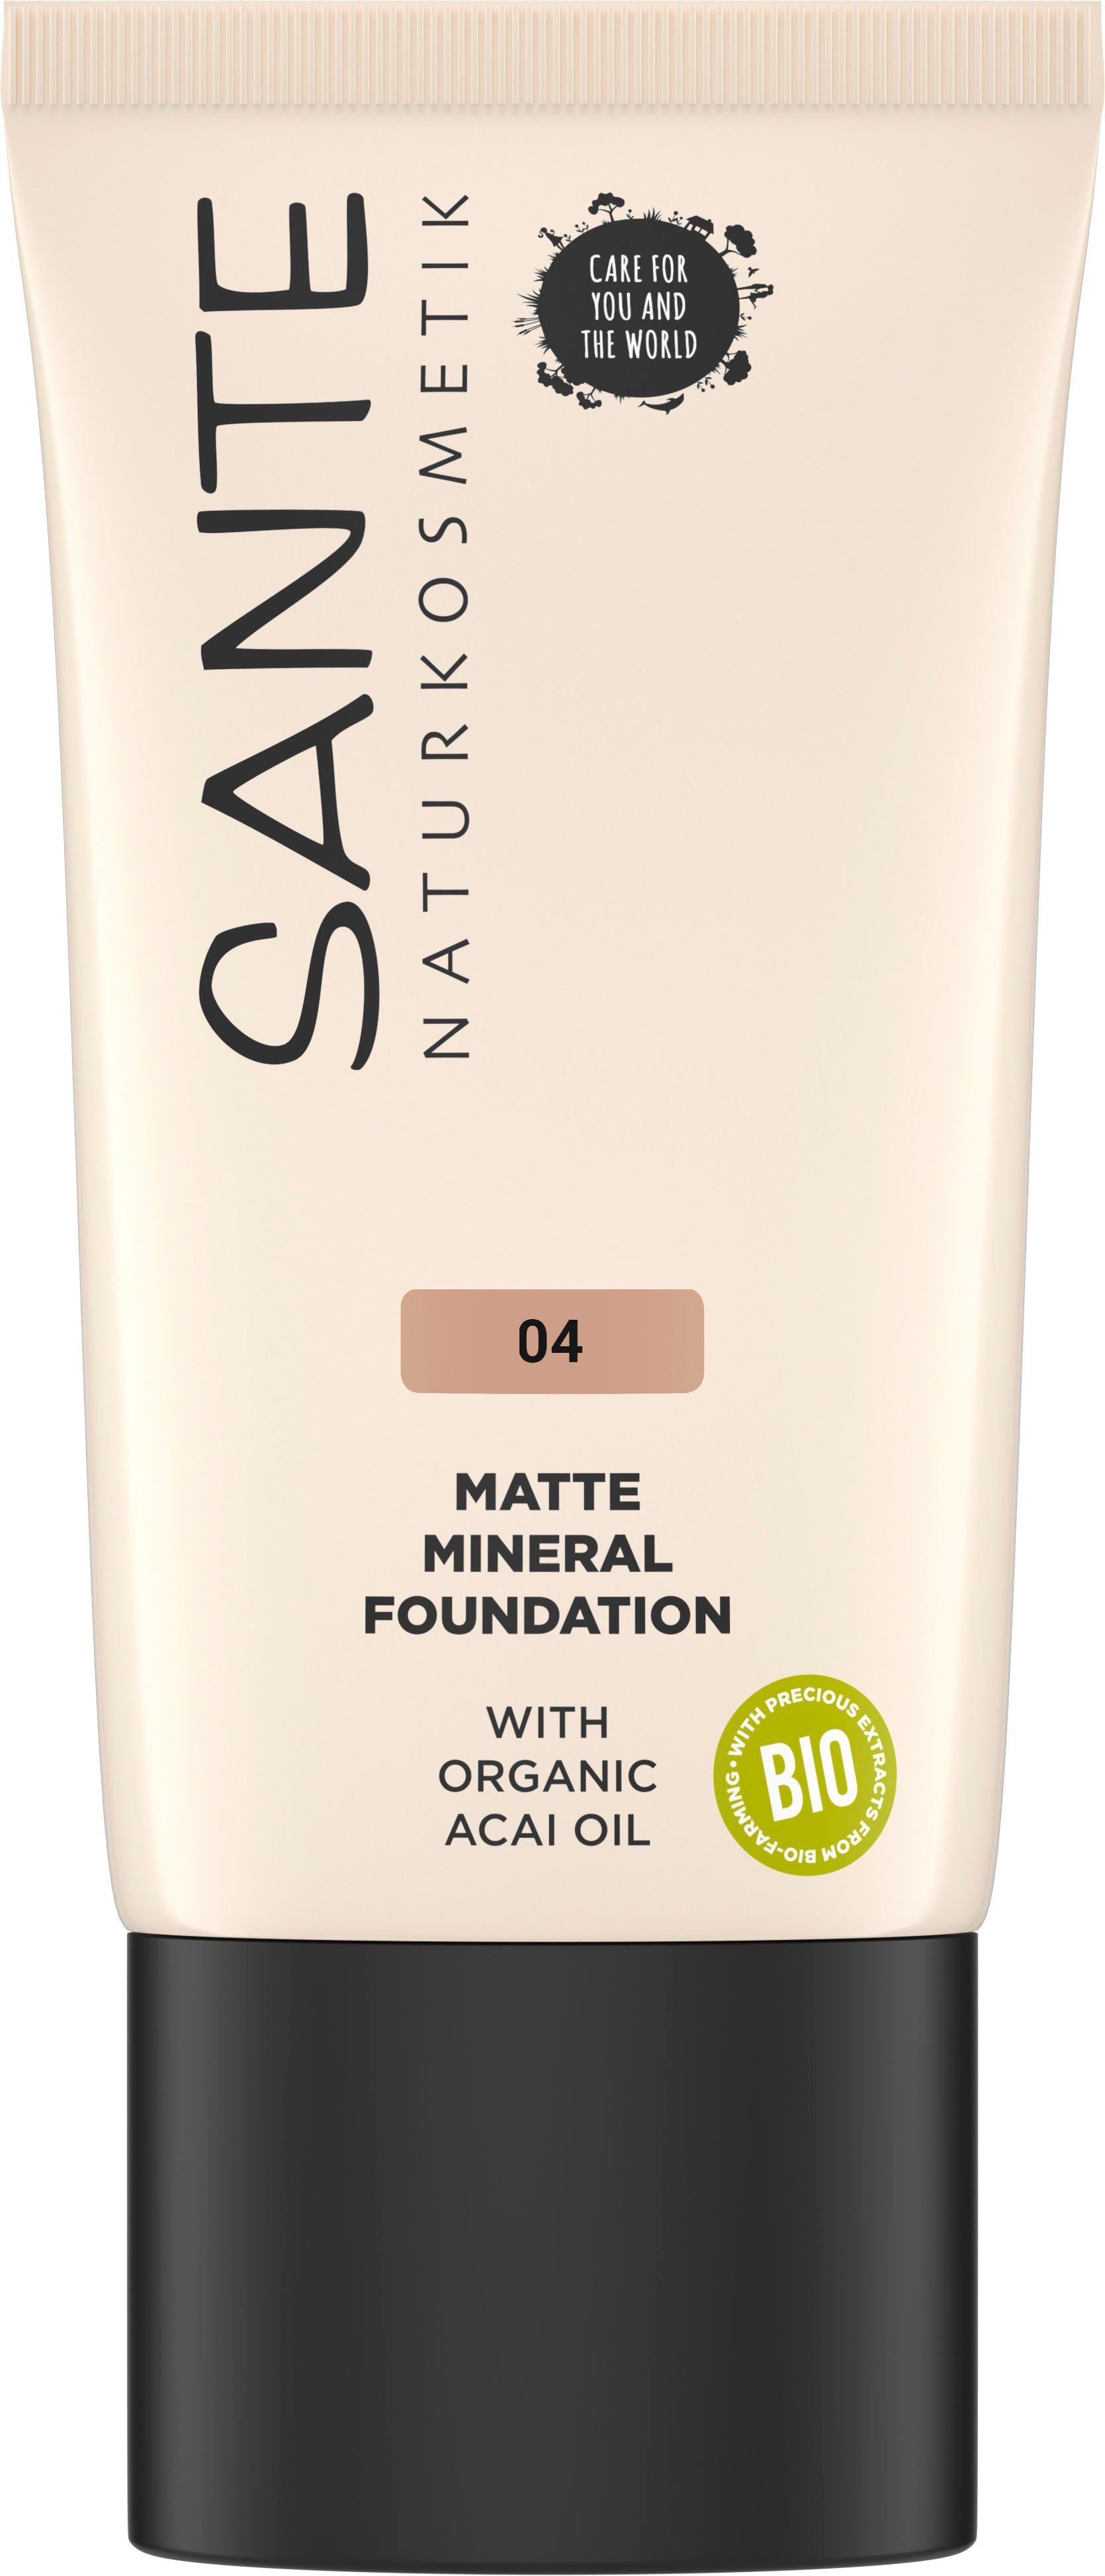 SANTE Foundation Matte Mineral Foundation 04 Cool Fawn